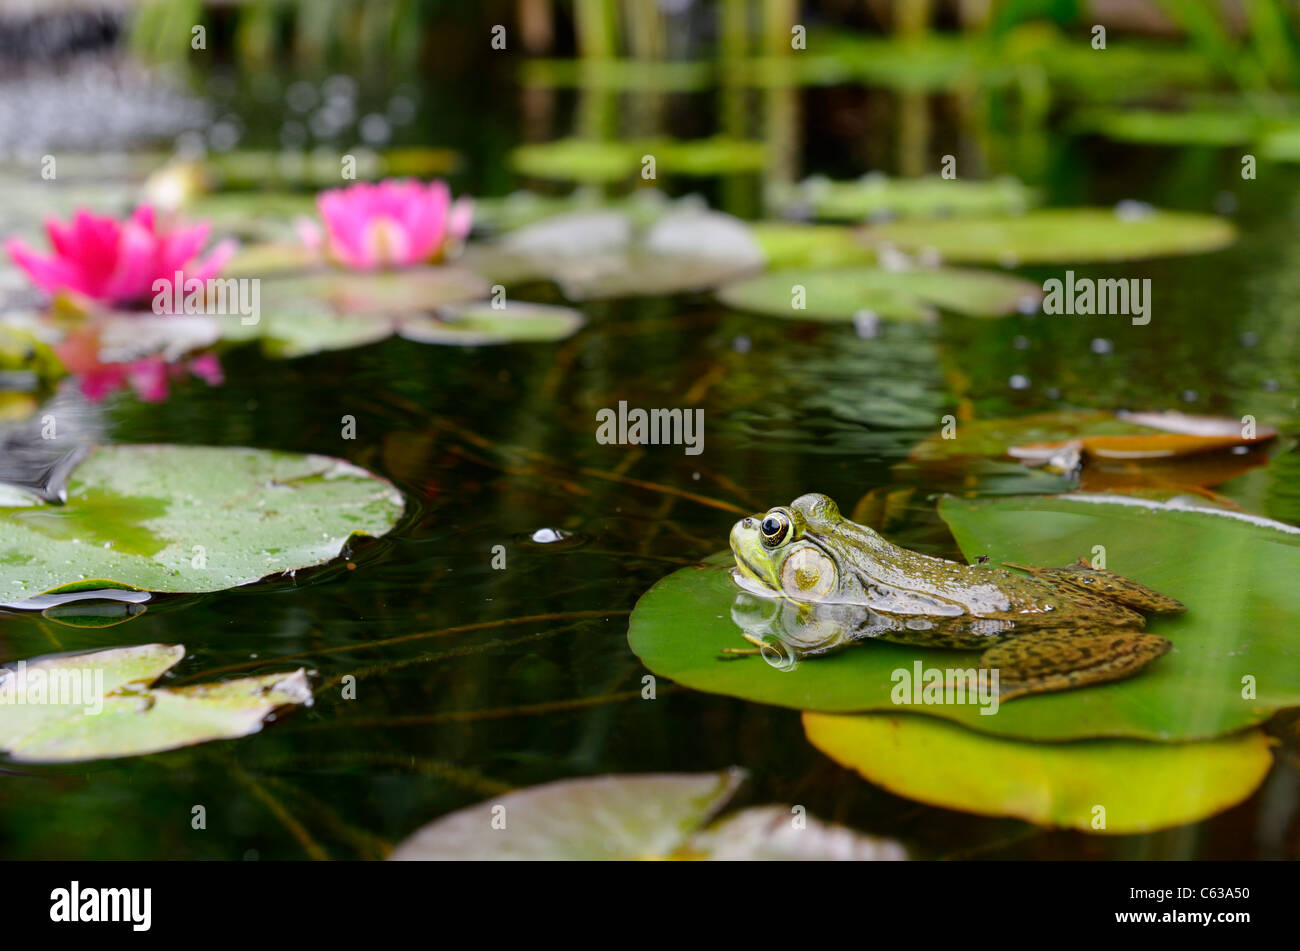 Green frog floating on a water lily pad in a pond with pink flowers Stock Photo